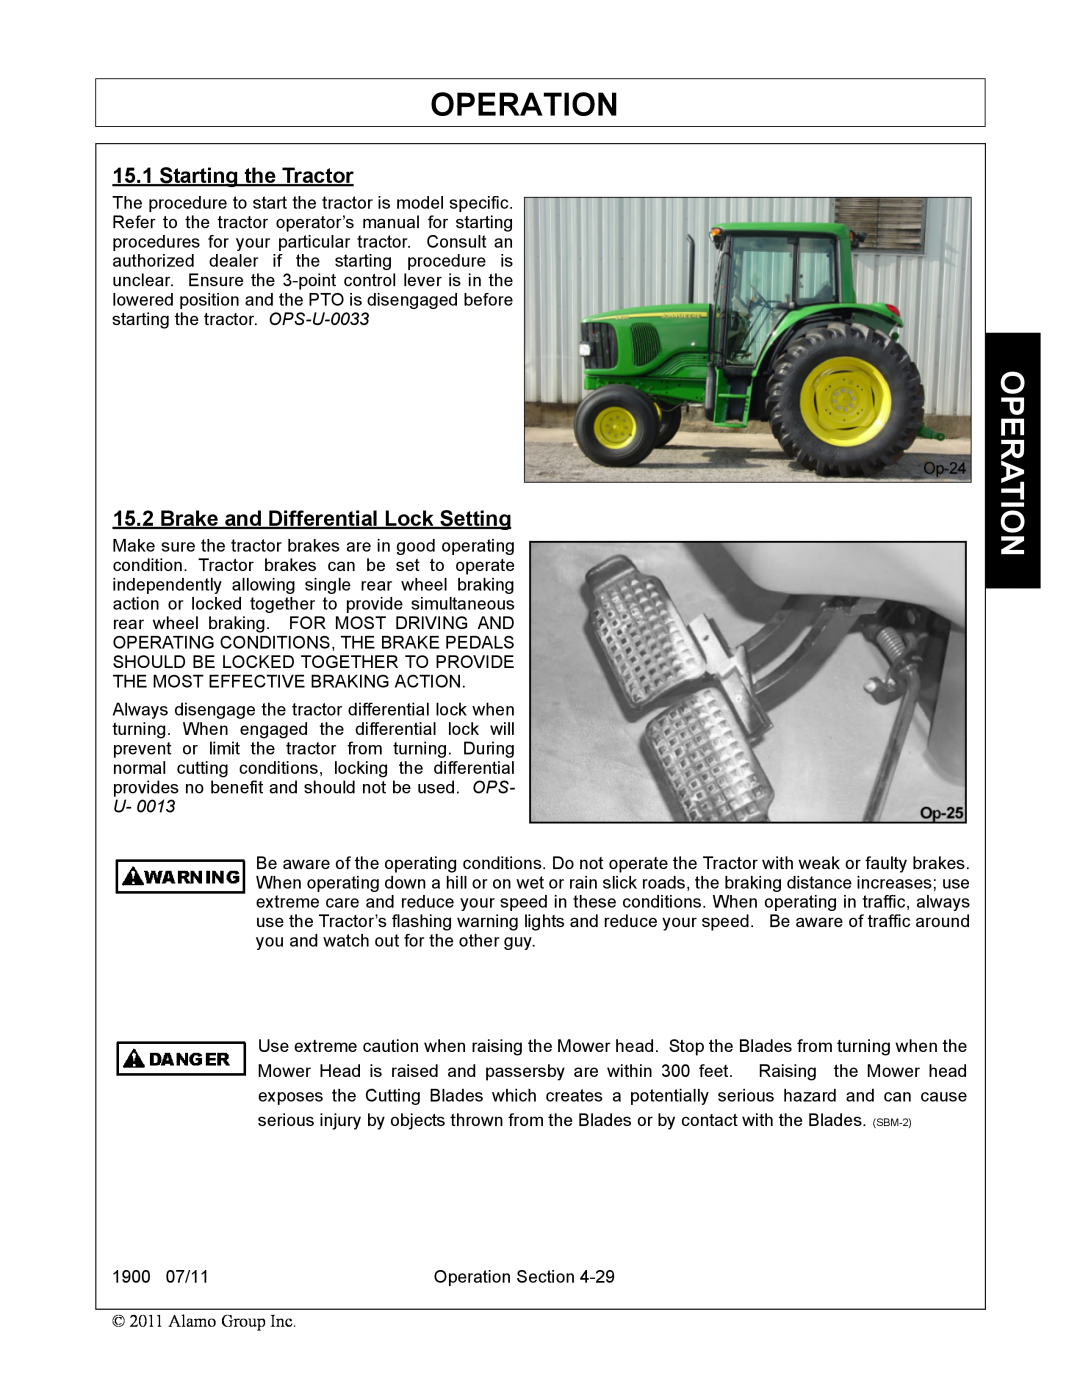 Alamo 1900 manual Operation, Starting the Tractor, Brake and Differential Lock Setting 